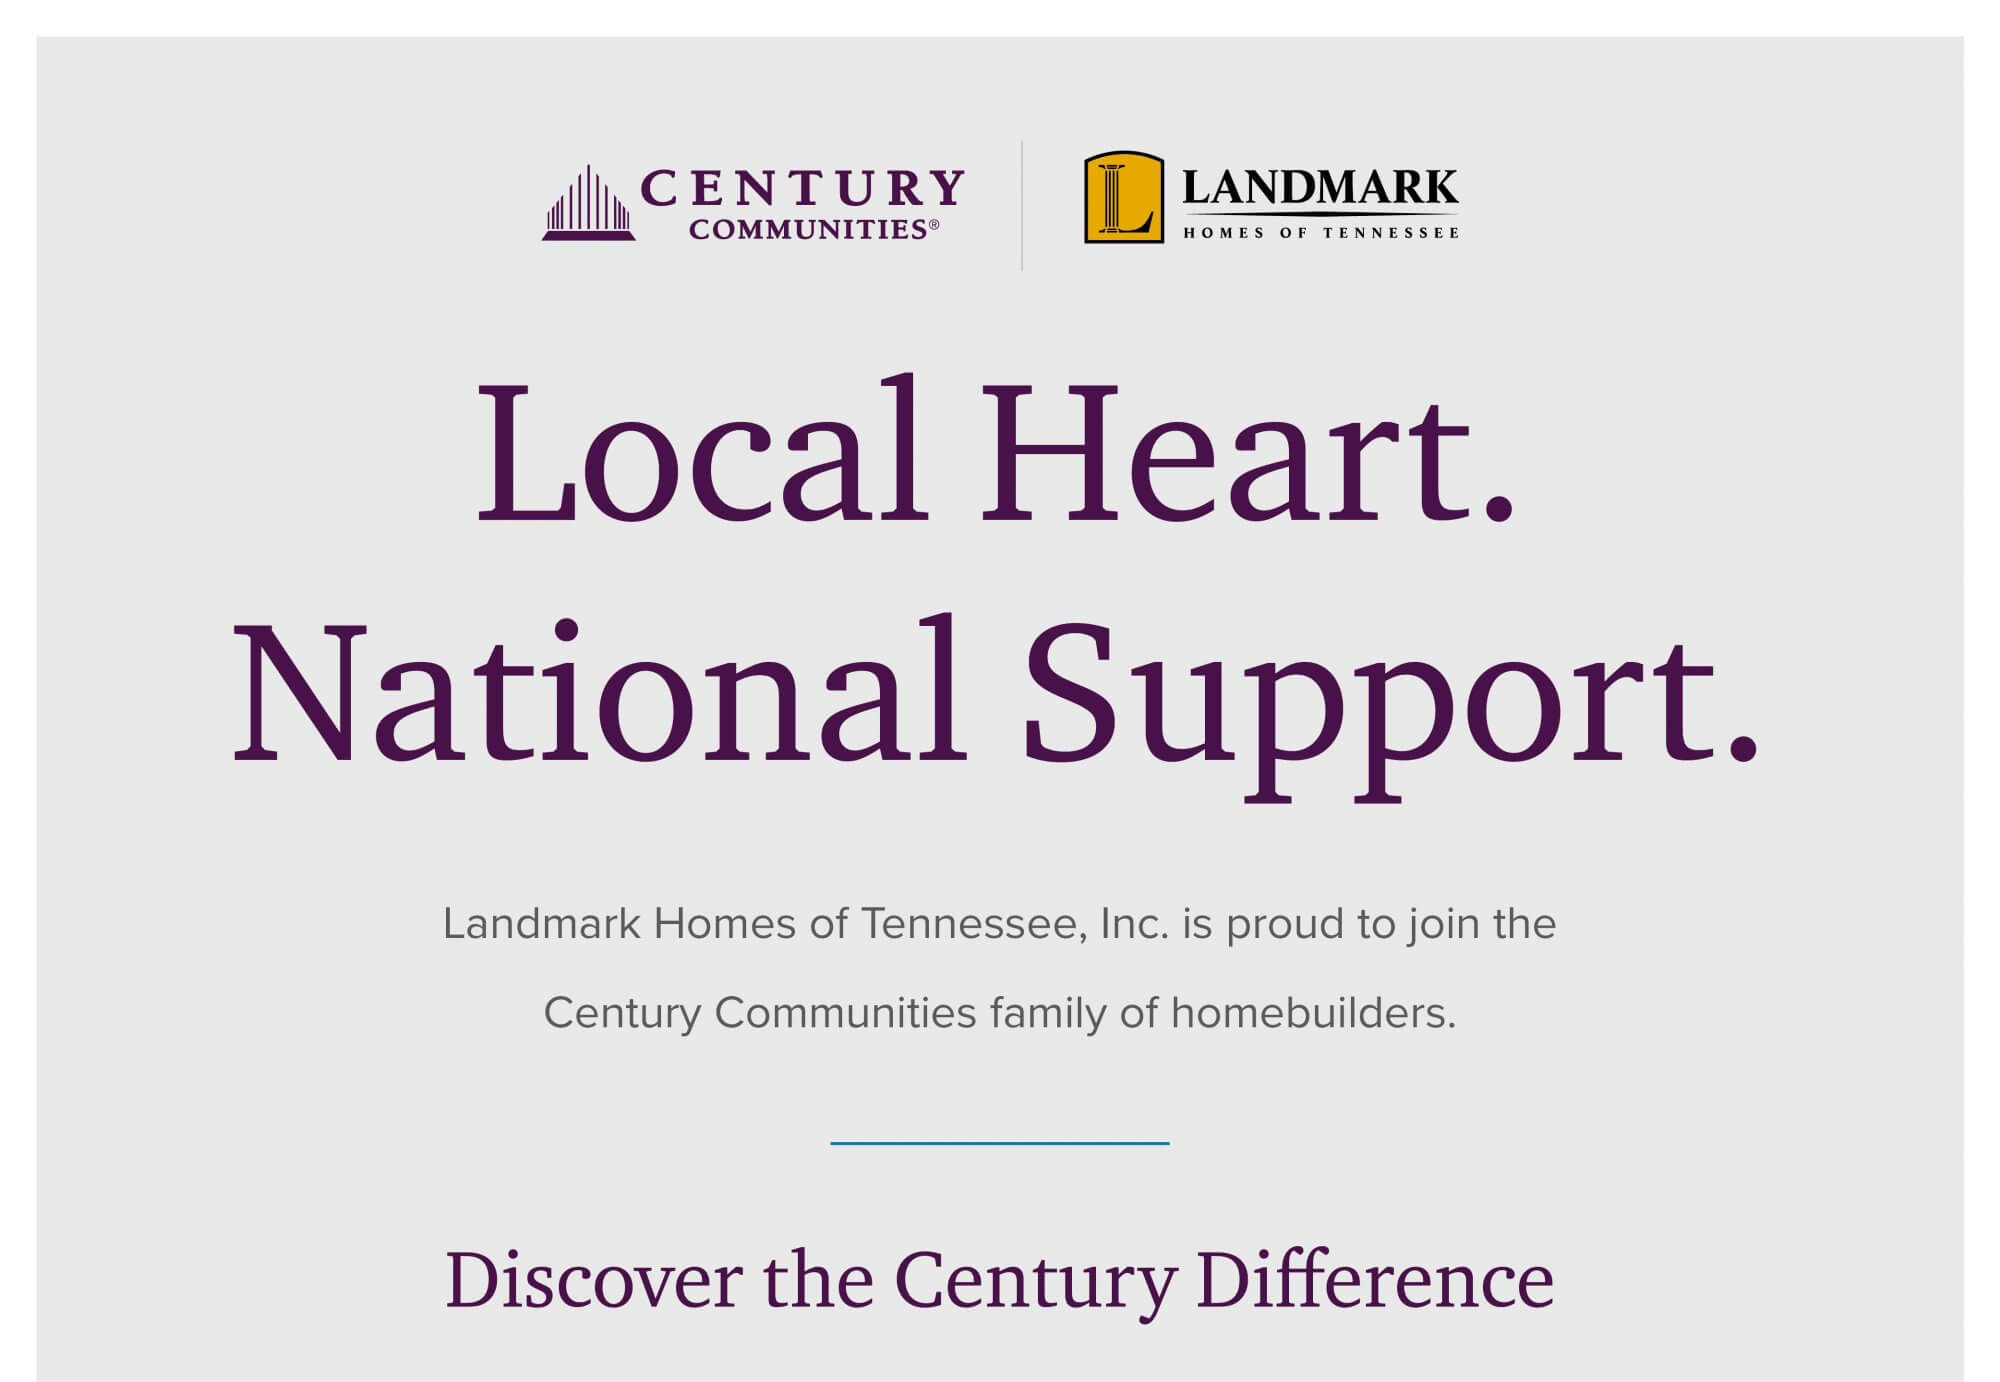 Local Heart. National Support. Landmark Homes of Tennessee, Inc. is proud to join the Century Communities family of homebuilders.